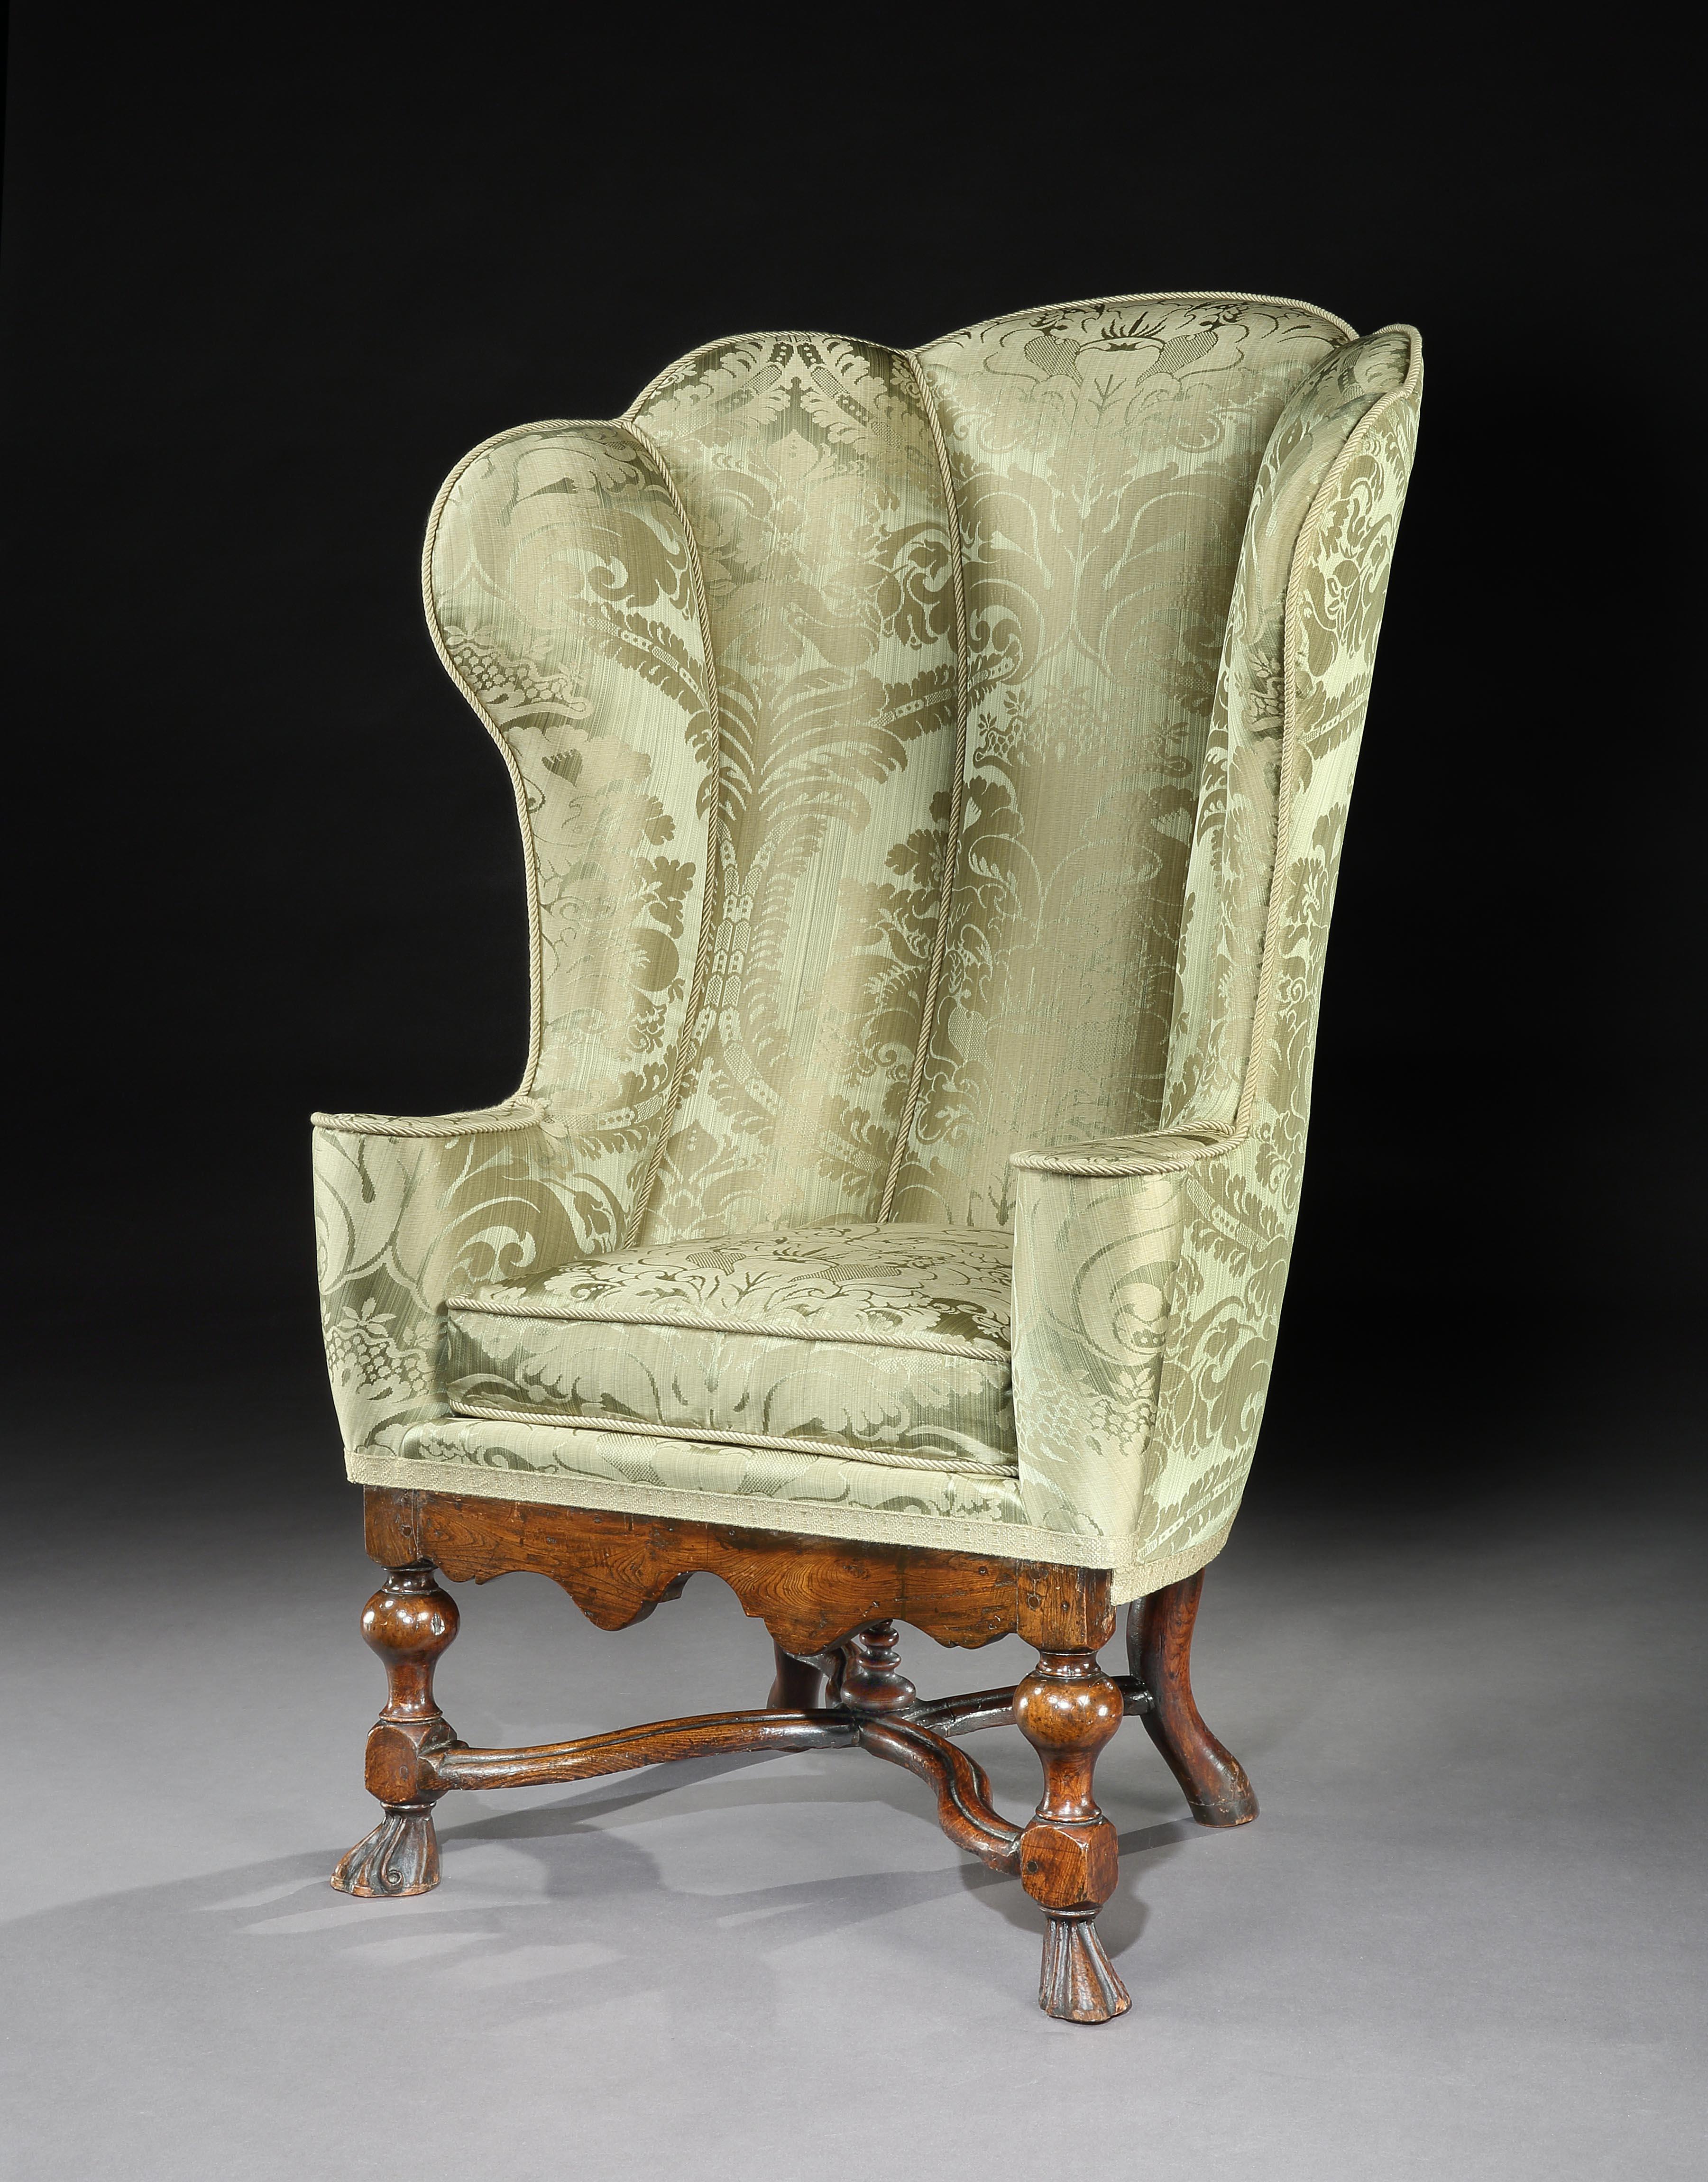 An exceptionally, rare 18th century, upholstered, elm, wing armchair with a scalloped back from Notley Priory & The Collection of Vivien Leigh & Laurence Oliver by Descent

- Acquired with a rare, scalloped back wing armchair from the Estate of